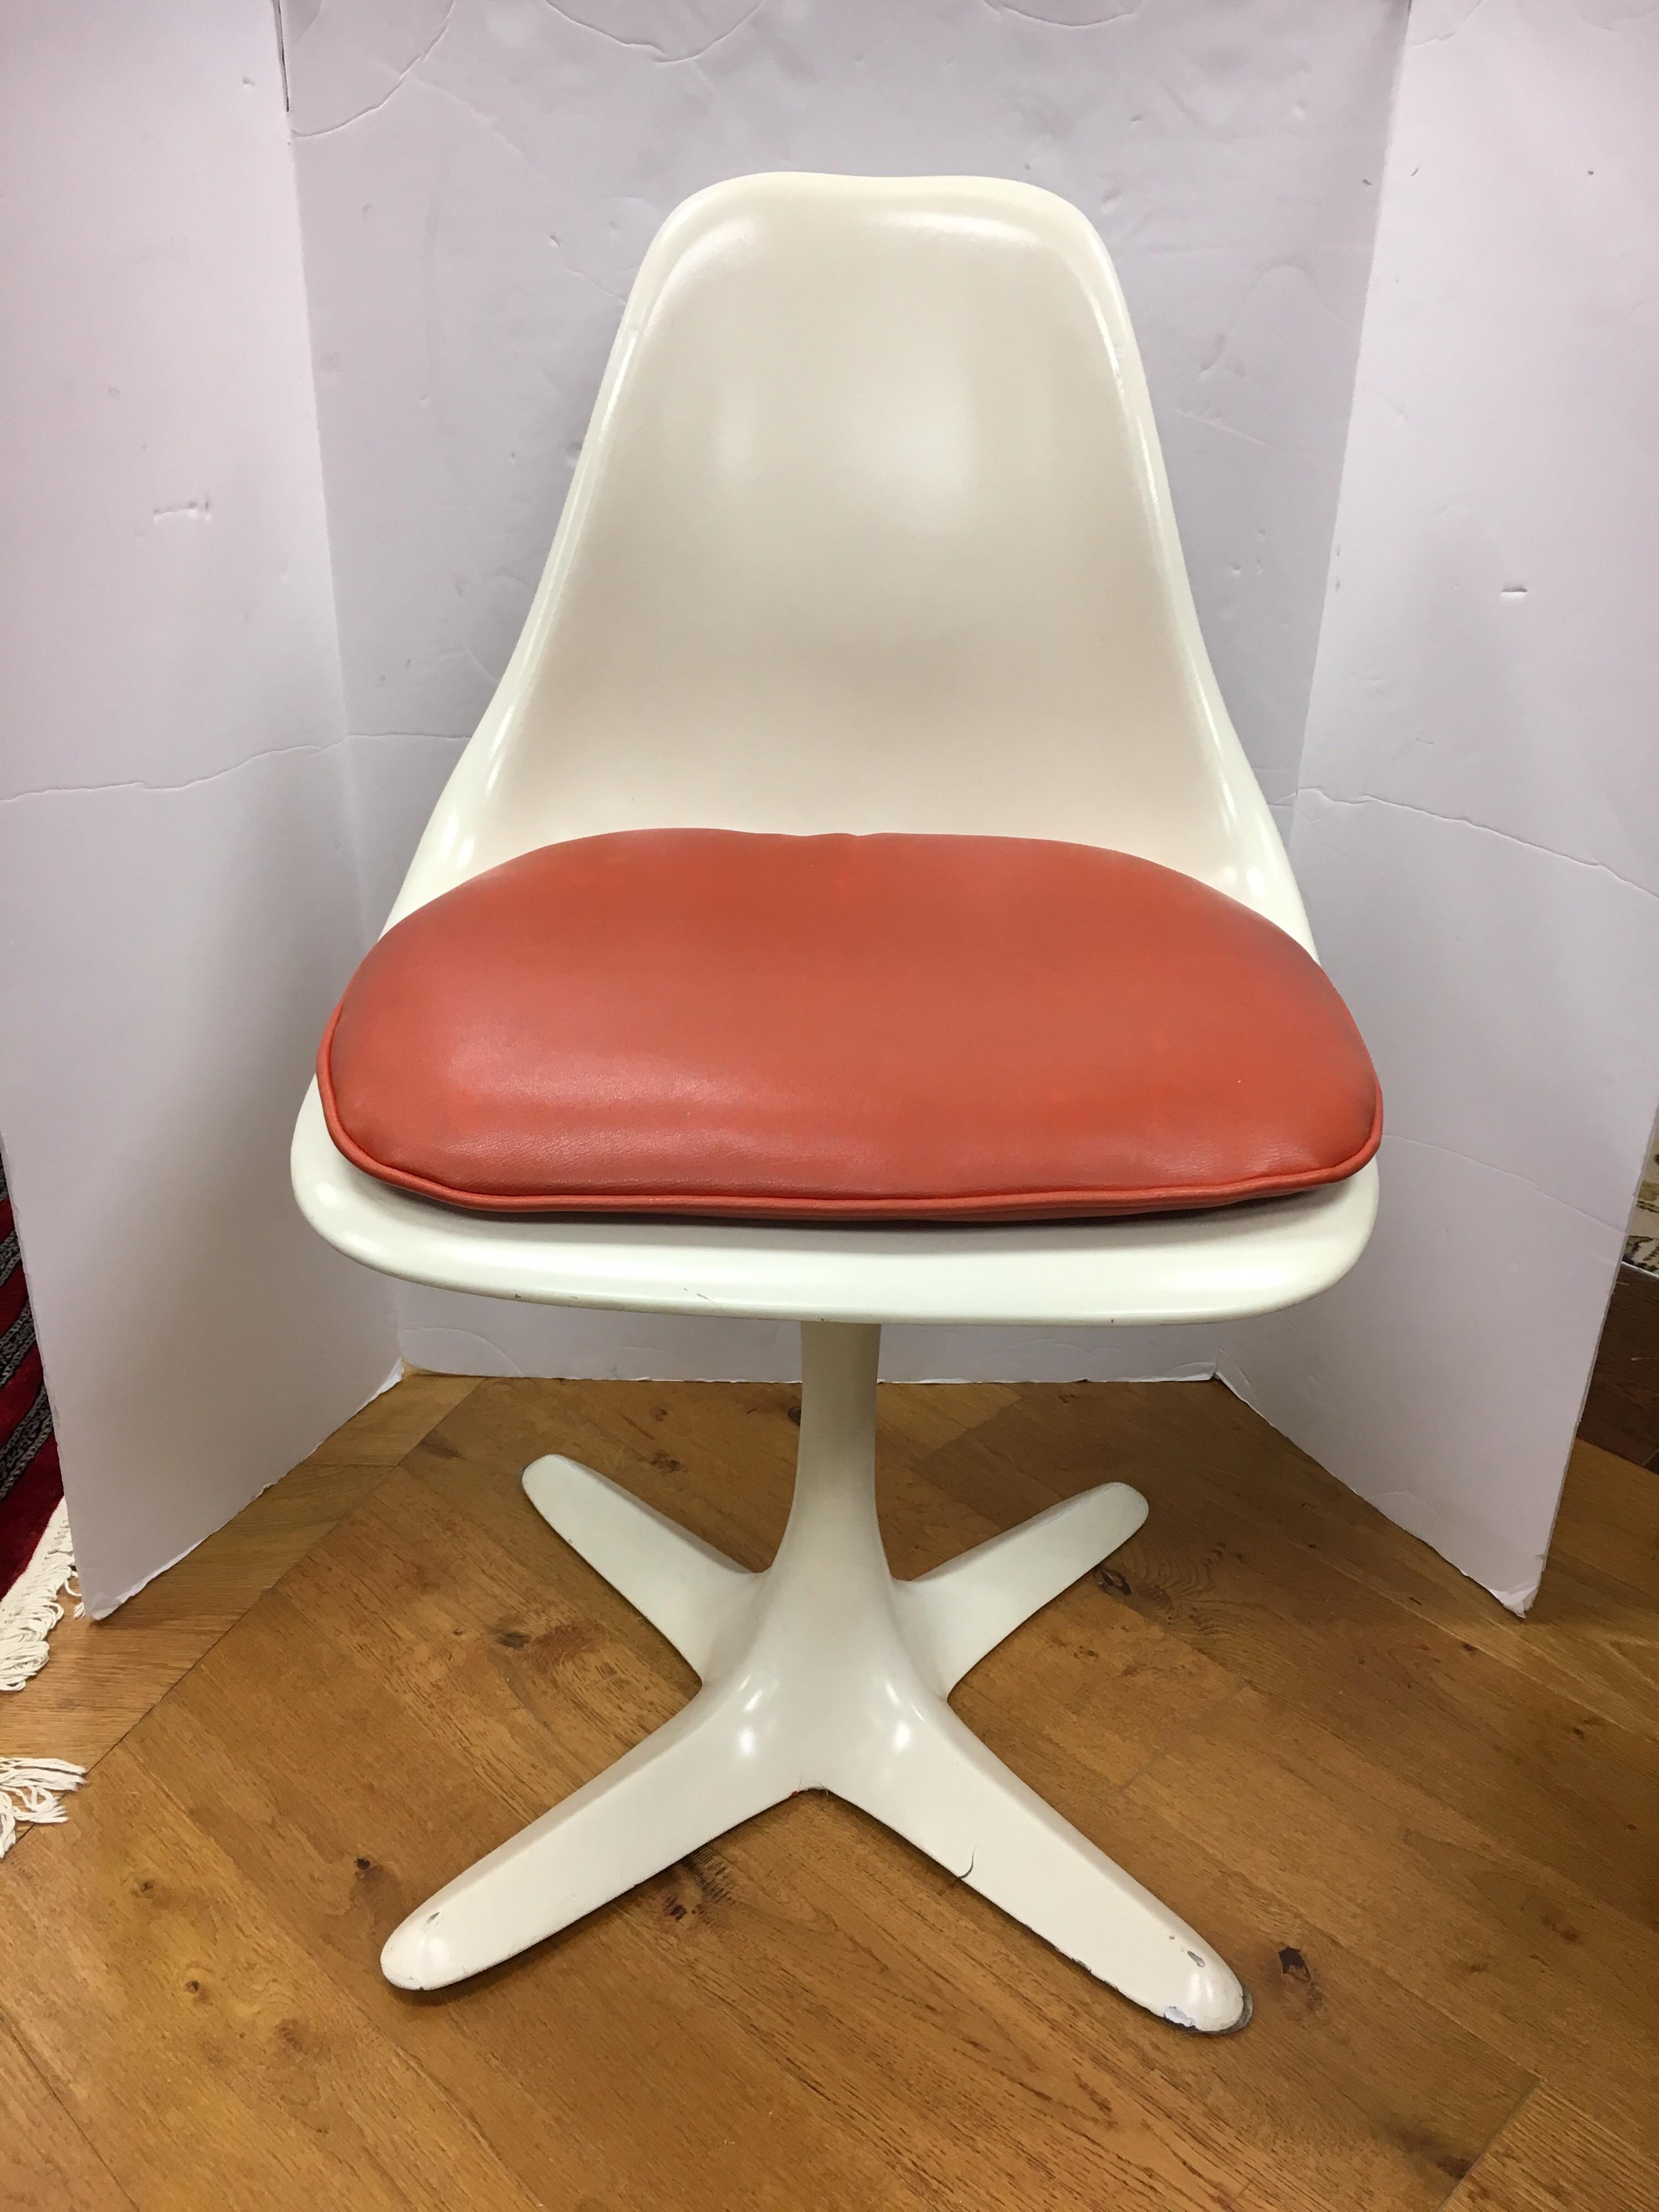 True period Saarinen style set of six white tulip chairs with orange/red removable cushion. Manufactured by Burke, USA in the 1970s. Made of resin, metal and seat fabric which is vinyl.